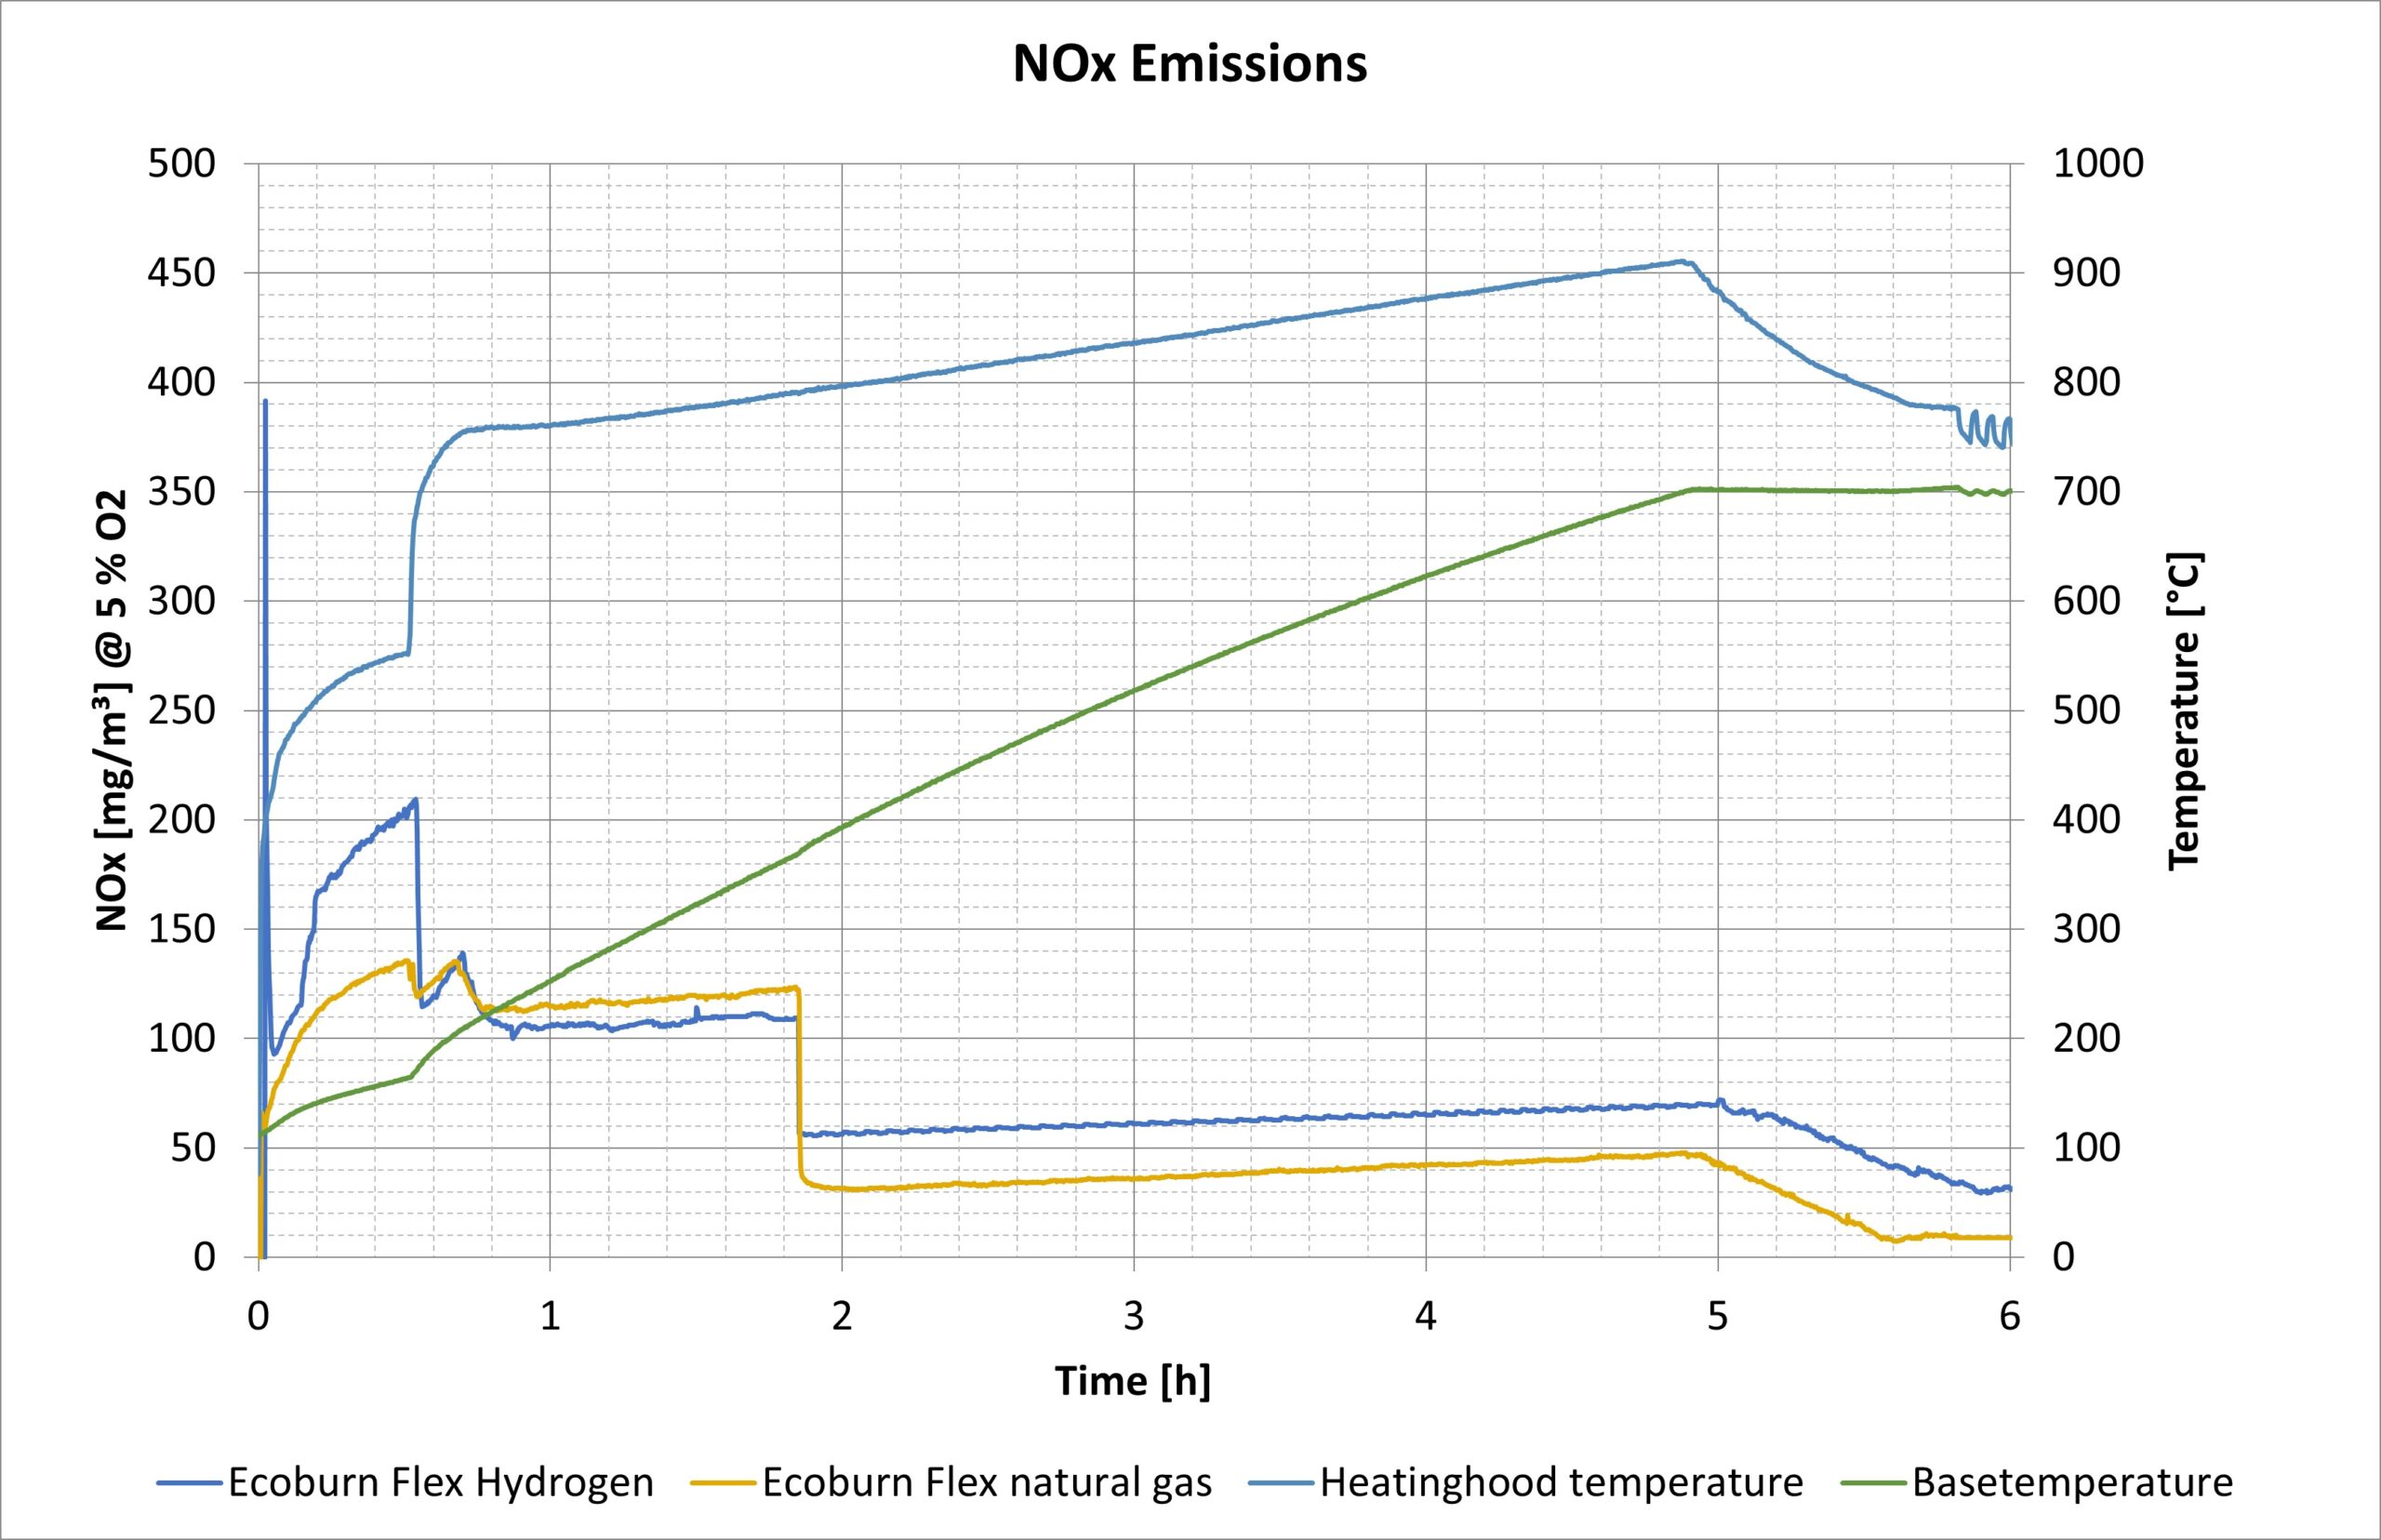 NOx emissions of an ECOBURN FLEX burner when operating with hydrogen and natural gas